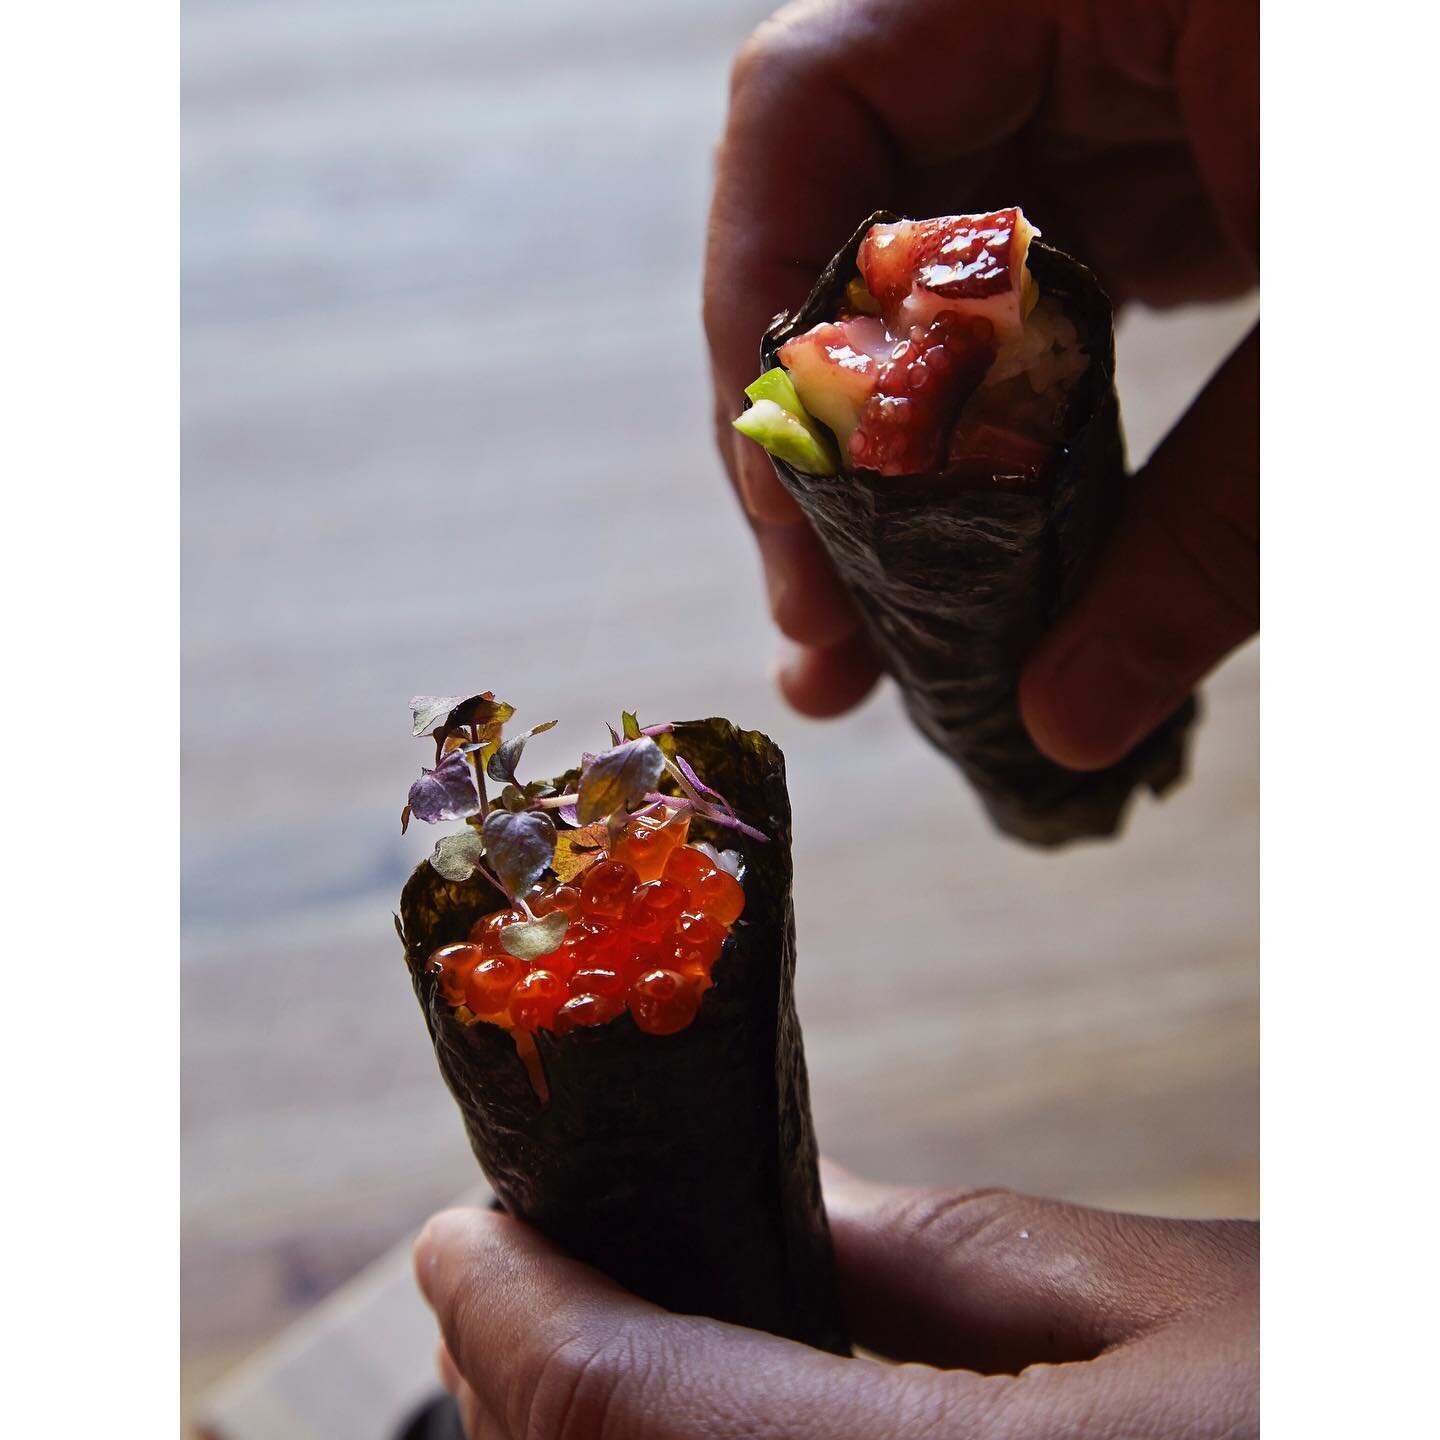 TEMAKI hand rolled sushi
There&rsquo;s no secret. Fresh nori seaweed, sushi rice, and sashimi. Your choice of toro, sea-urchin, octopus, eggs, avocado, or Kaisen Special. Run, don&rsquo;t walk for this bite sized joy.

#handroll #sushilovers #uberfre